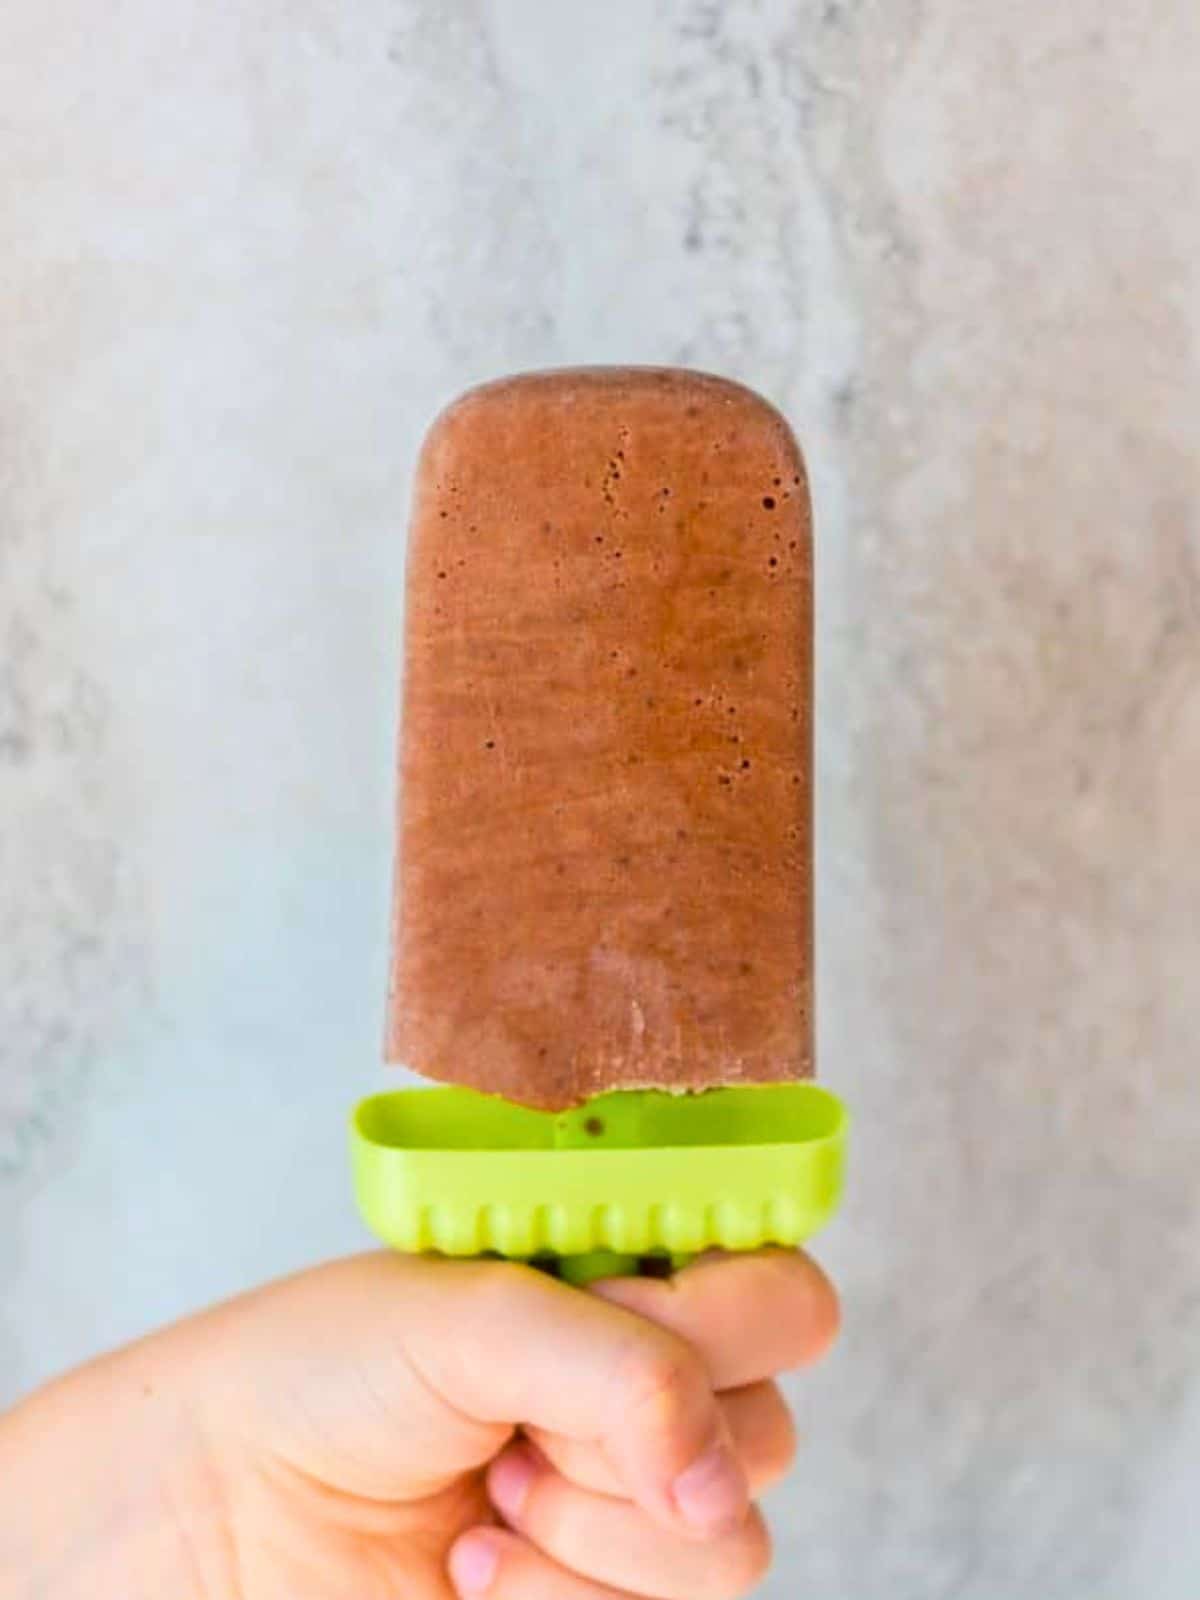 Child's hand holding homemade Fudgesicle with green handle.